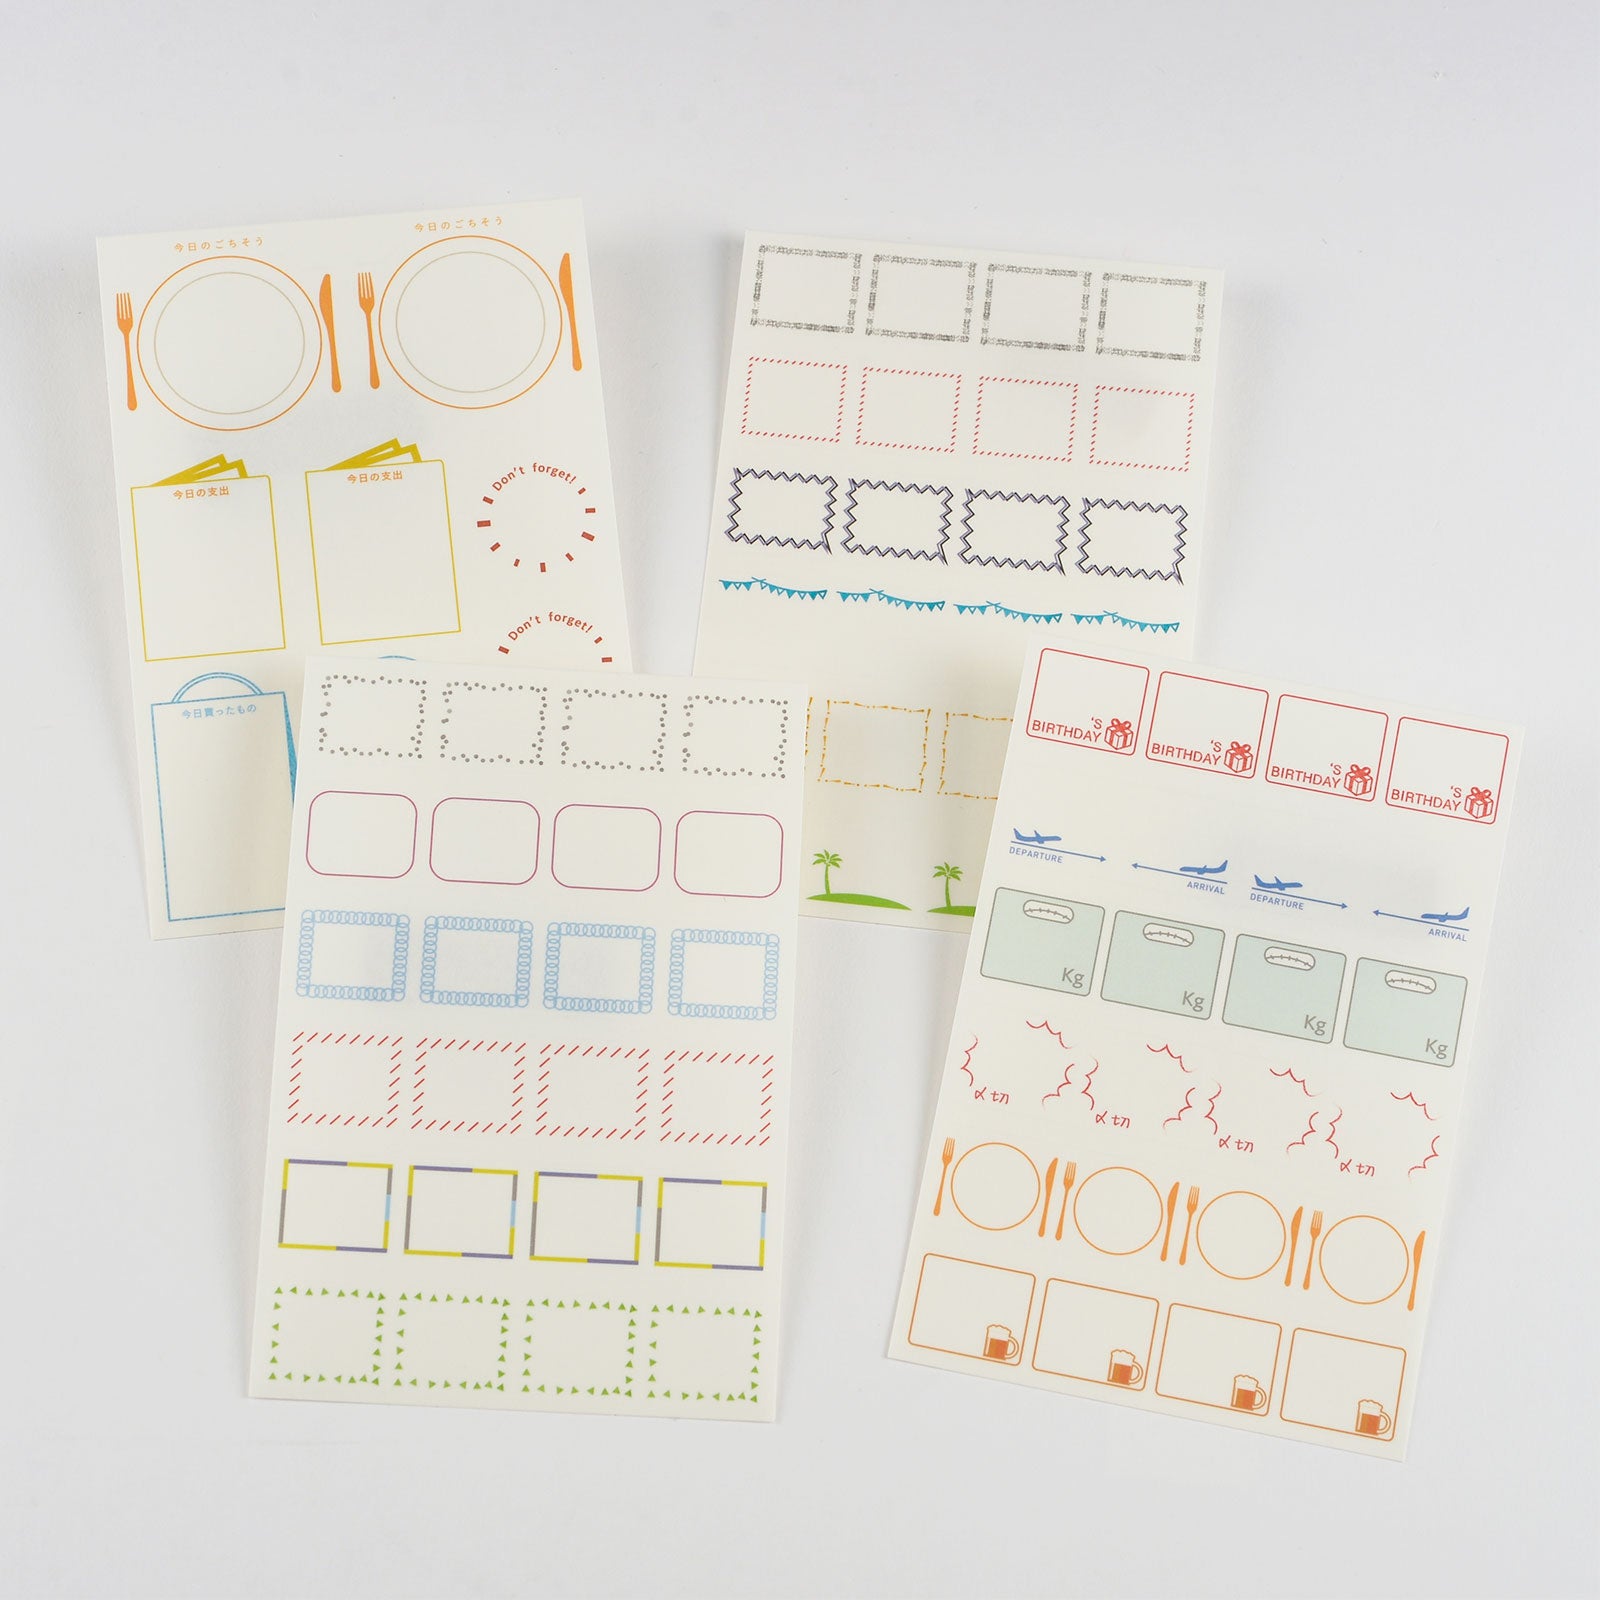 Hobonichi Frame Stickers This set of frame stickers is designed to perfectly fit the Japanese A6 Hobonichi Techo Original monthly calendar. The stickers come in several designs to make your pages pop. Stickers also come in larger “daily page” sizes to fit frames onto the daily pages.